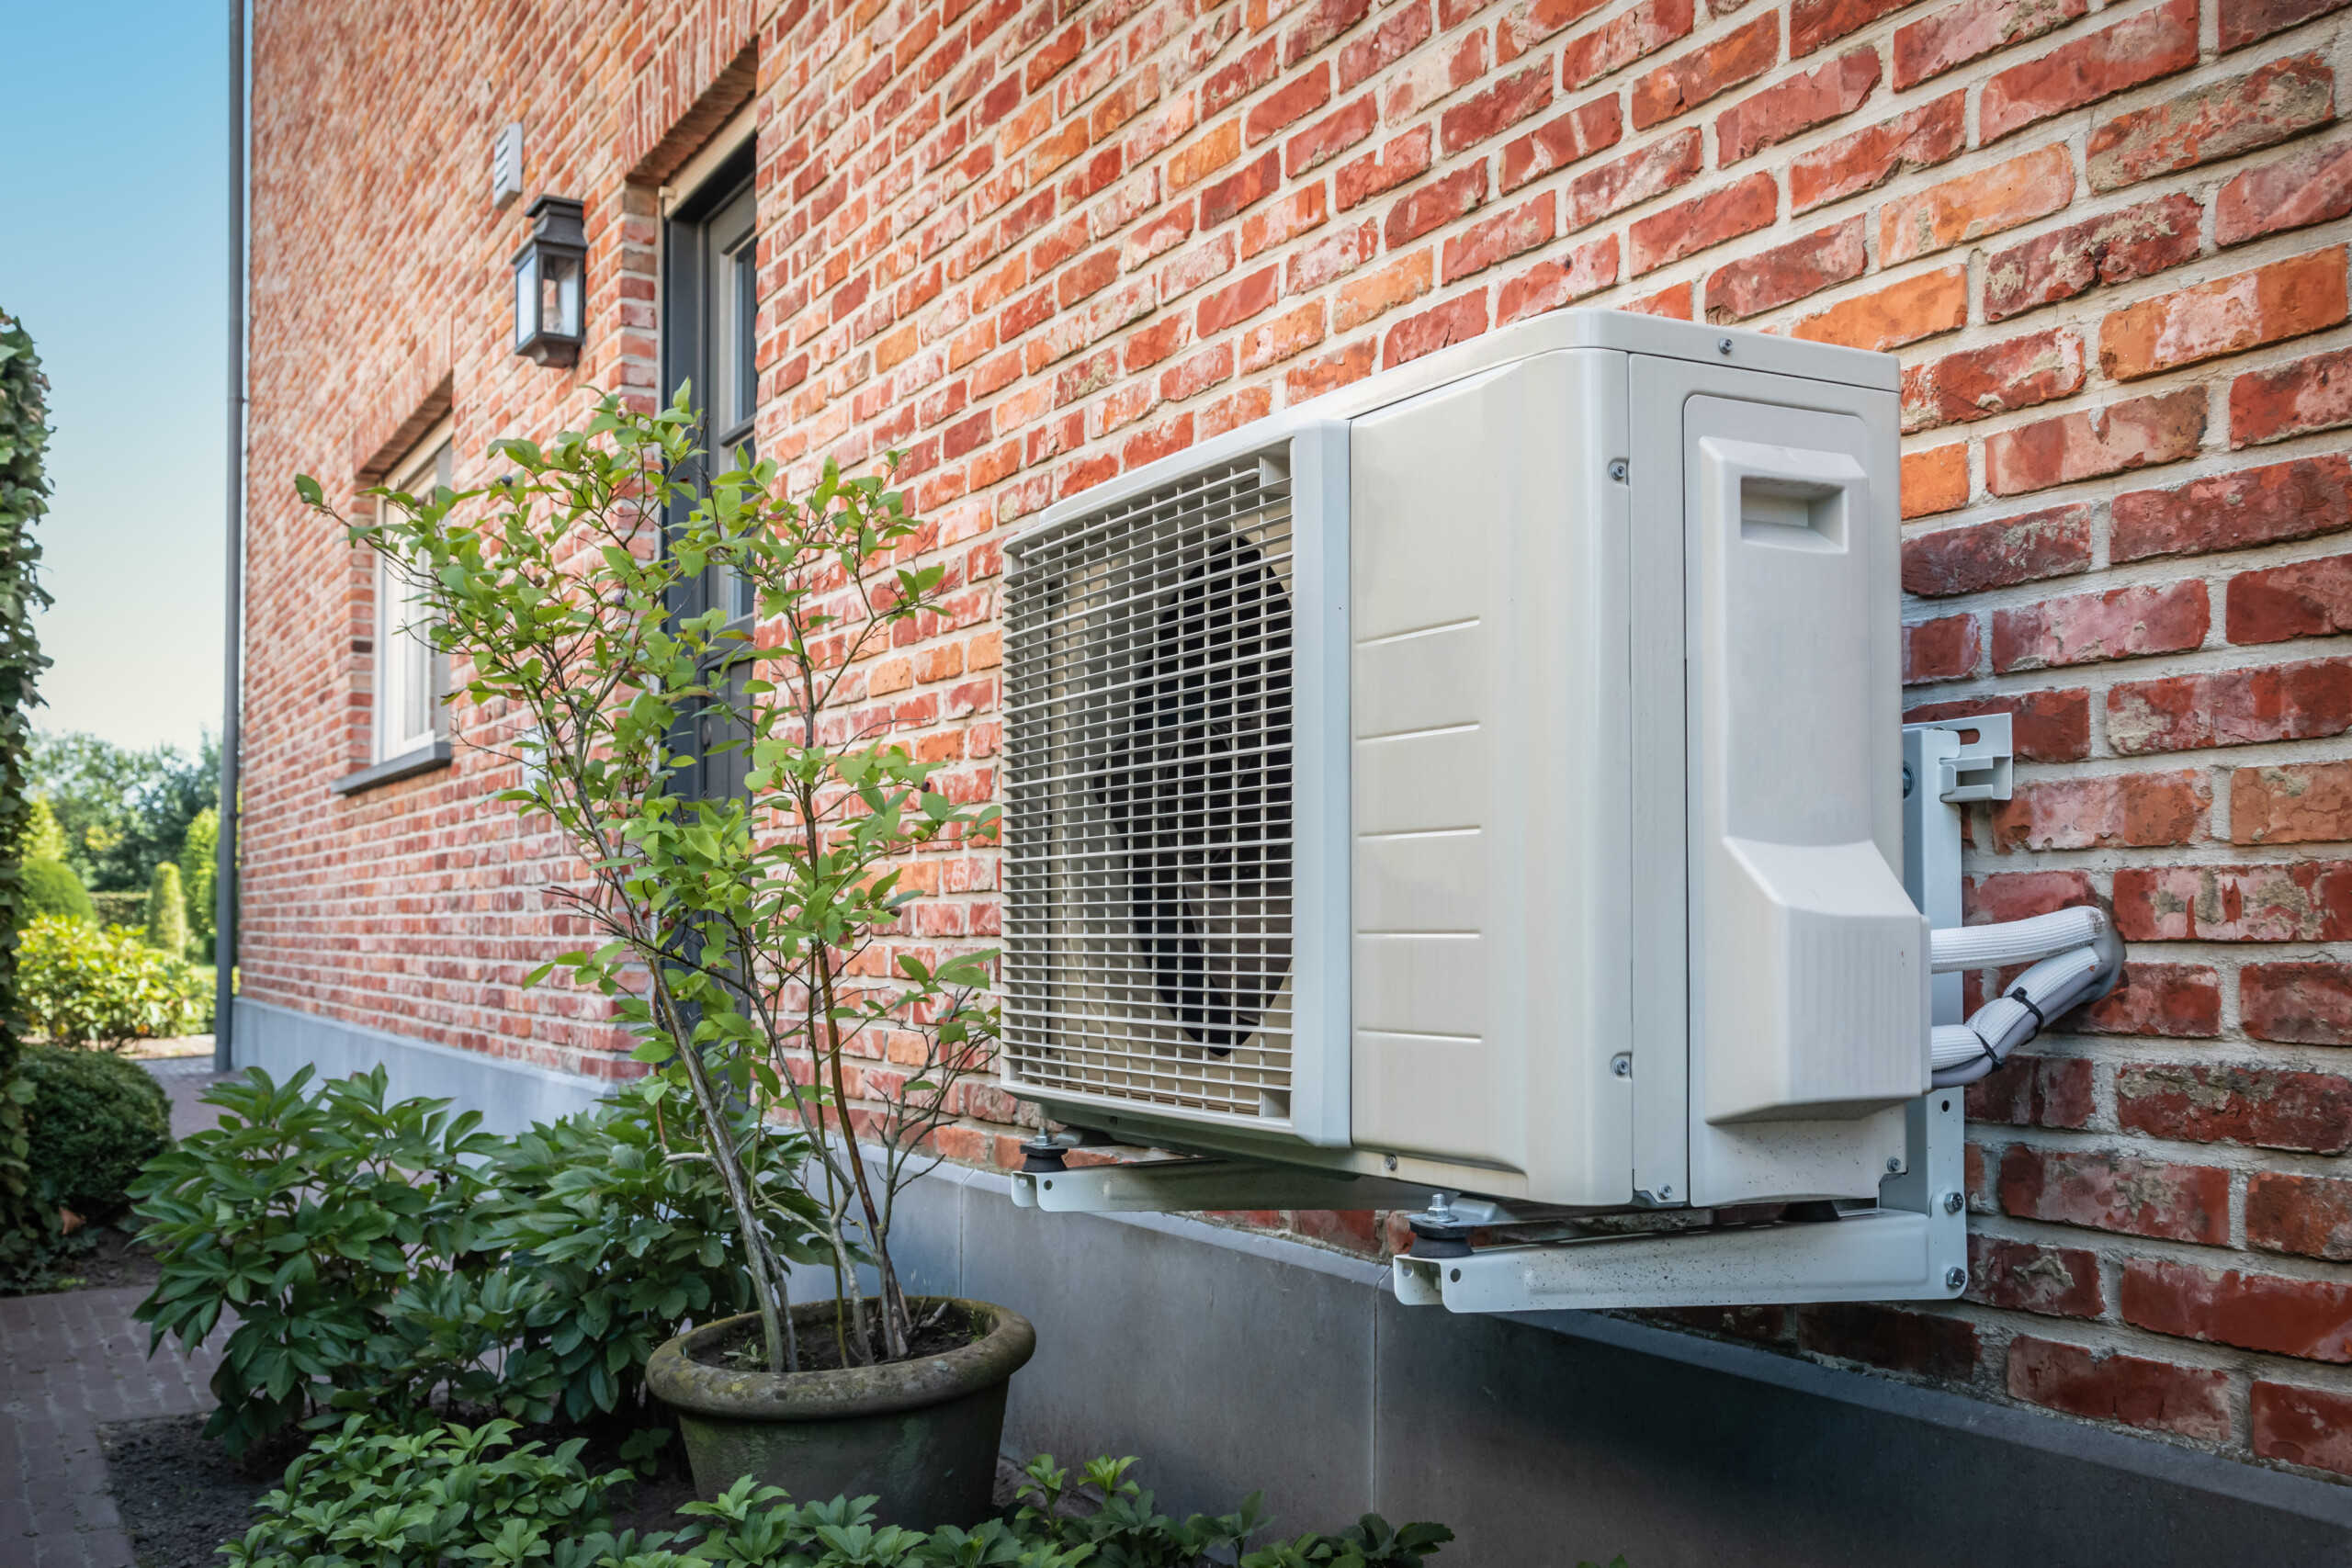 Air to air heat pump for cooling or heating the home. Outdoor un